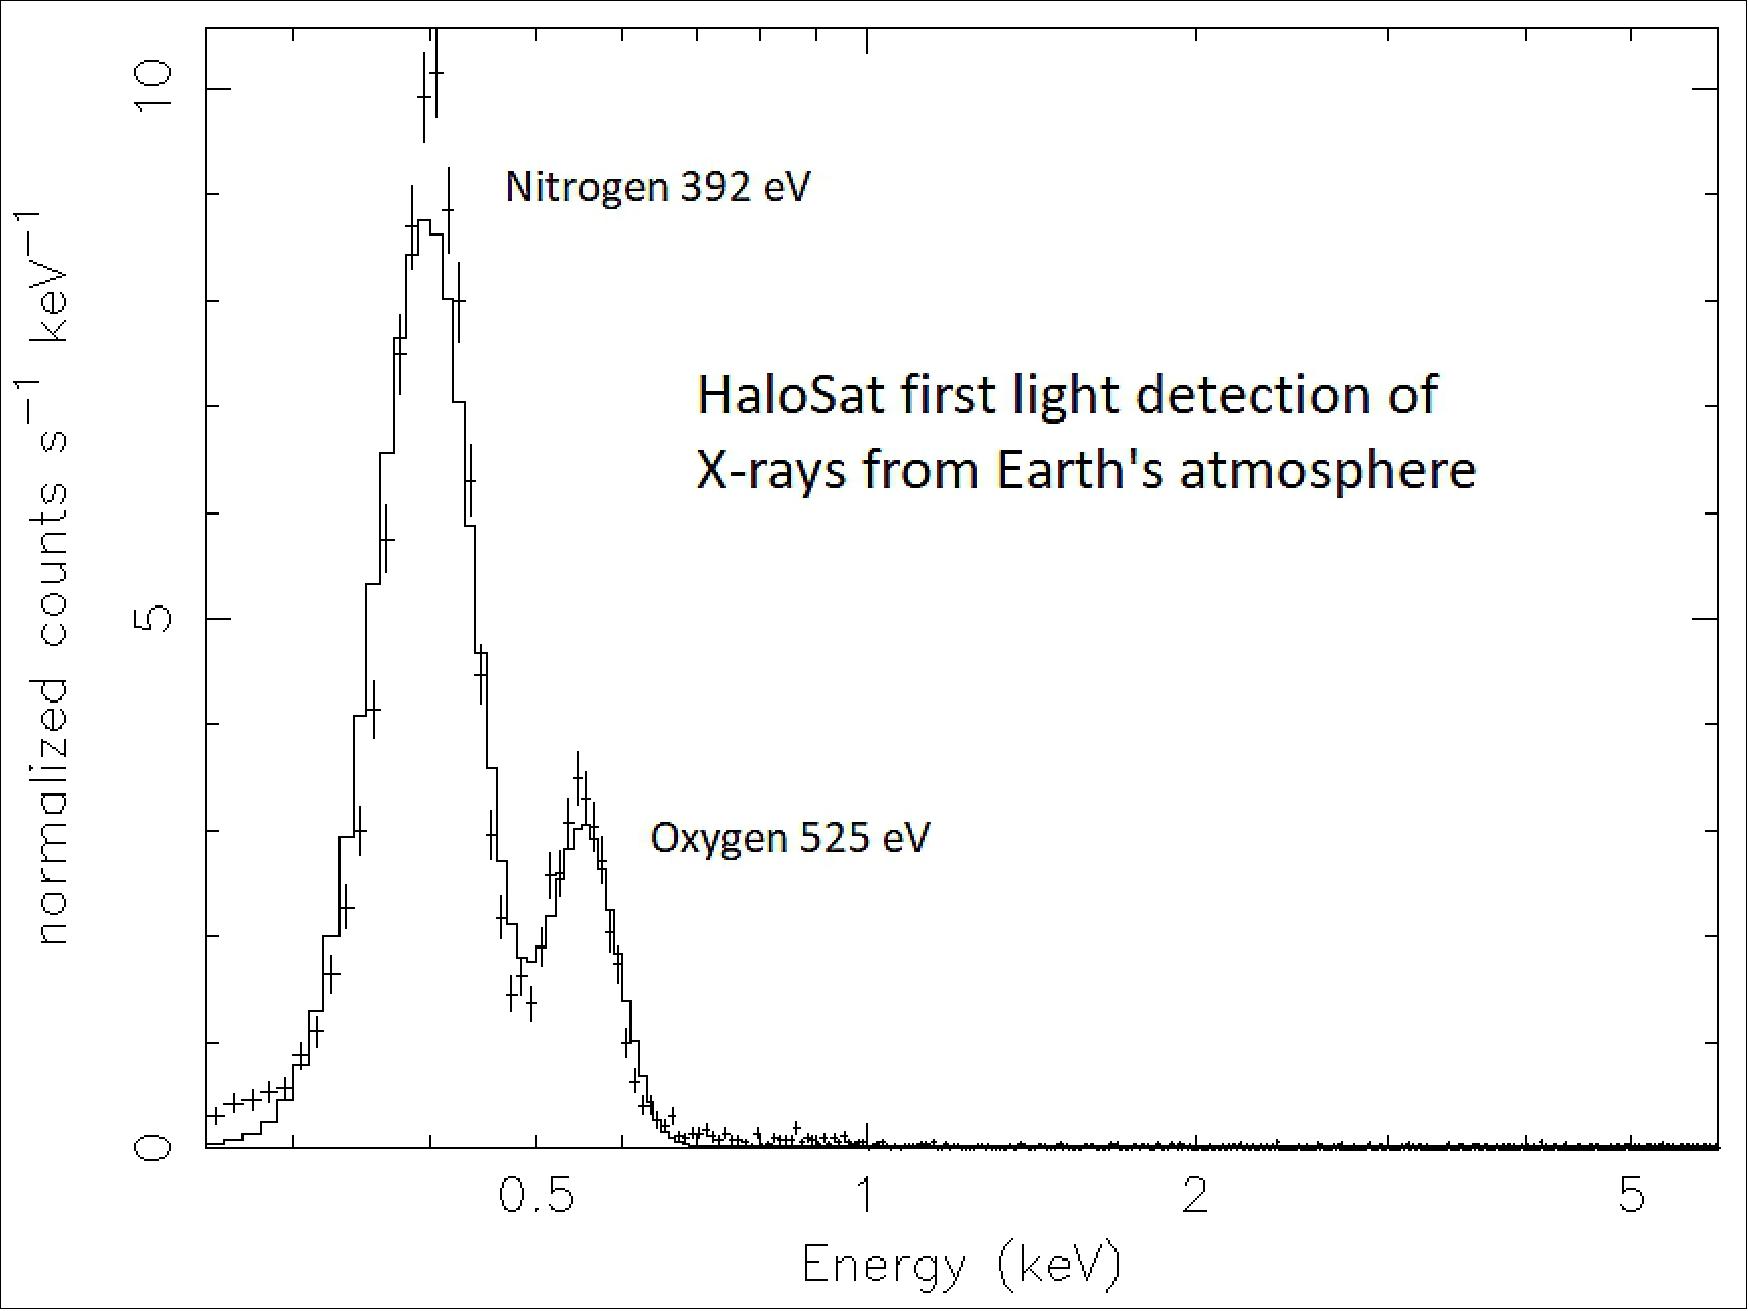 Figure 19: First light image of the X-ray surveyor of Earth's atmosphere from HaloSat (image credit: University of Iowa)